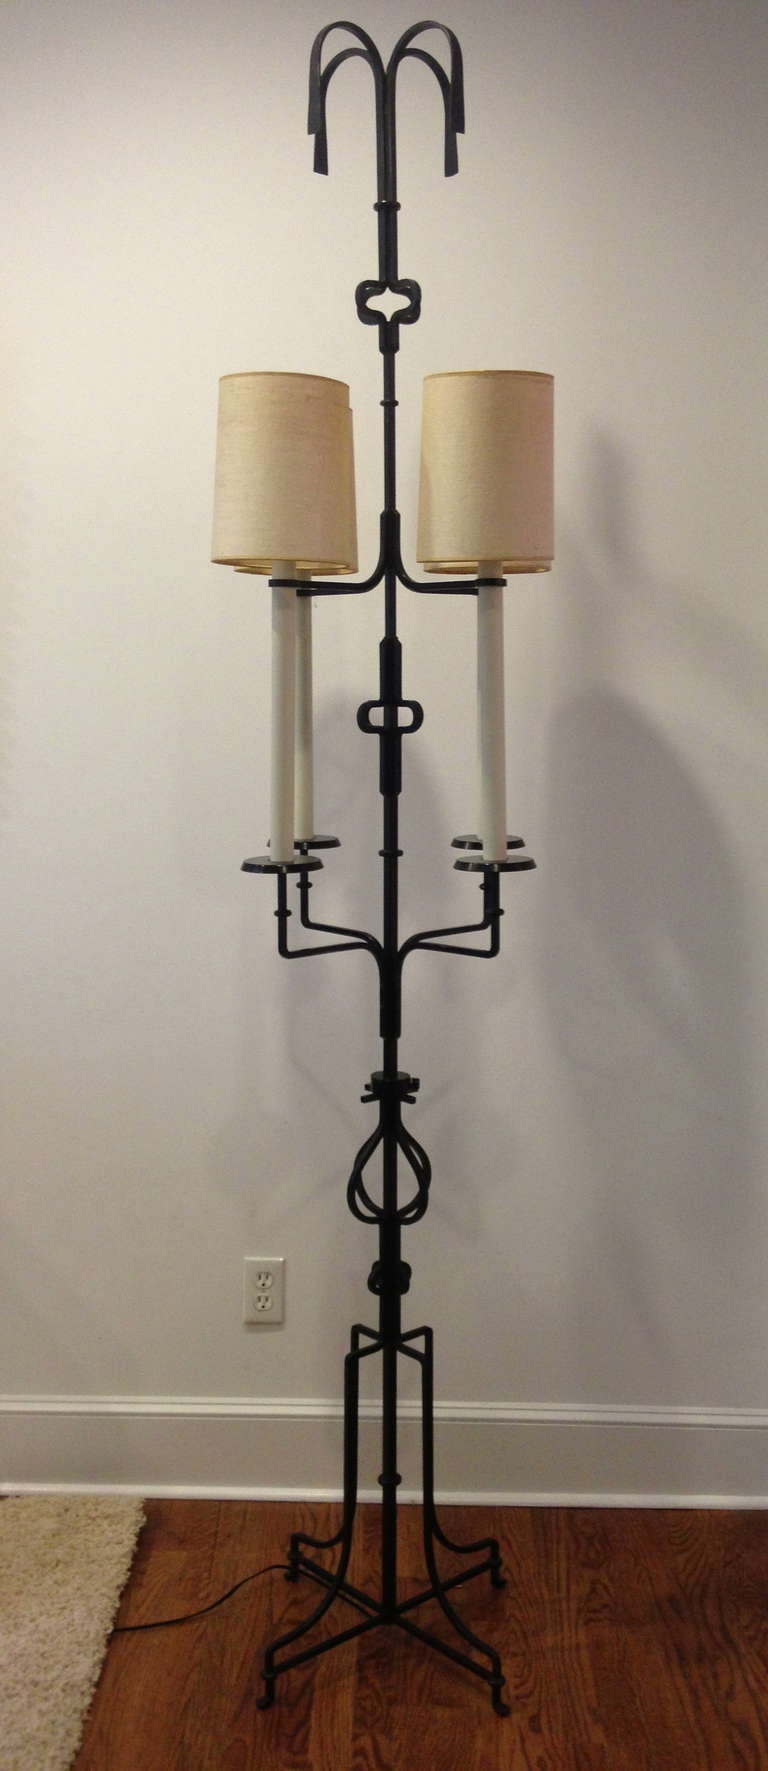 Exceptional four-light, iron floor lamp designed by Tommi Parzinger for Parzinger Originals. Height is 7 feet 5 inches.